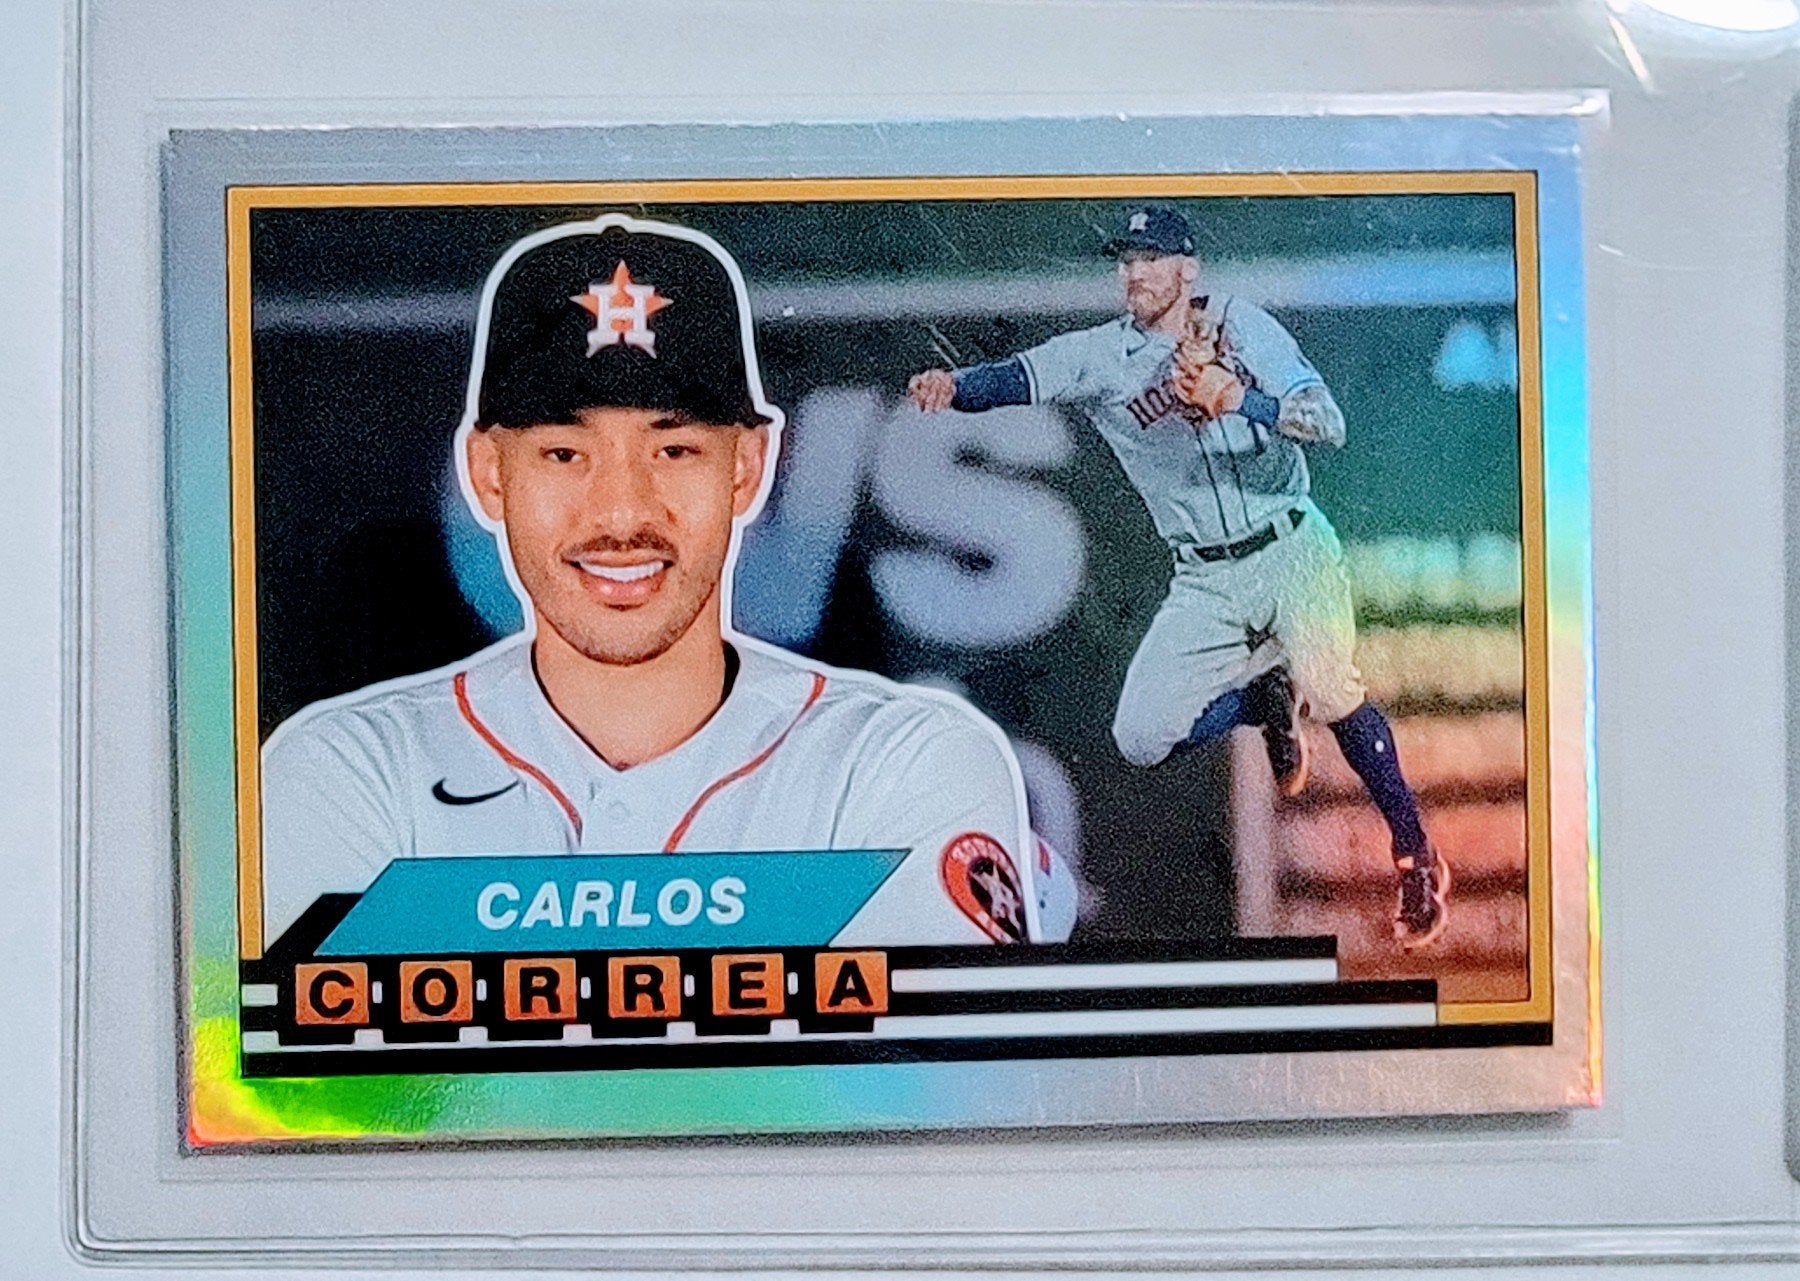 2021 Topps Archives Carlos Correa Rainbow Foil Insert Baseball Card AVM1 simple Xclusive Collectibles   